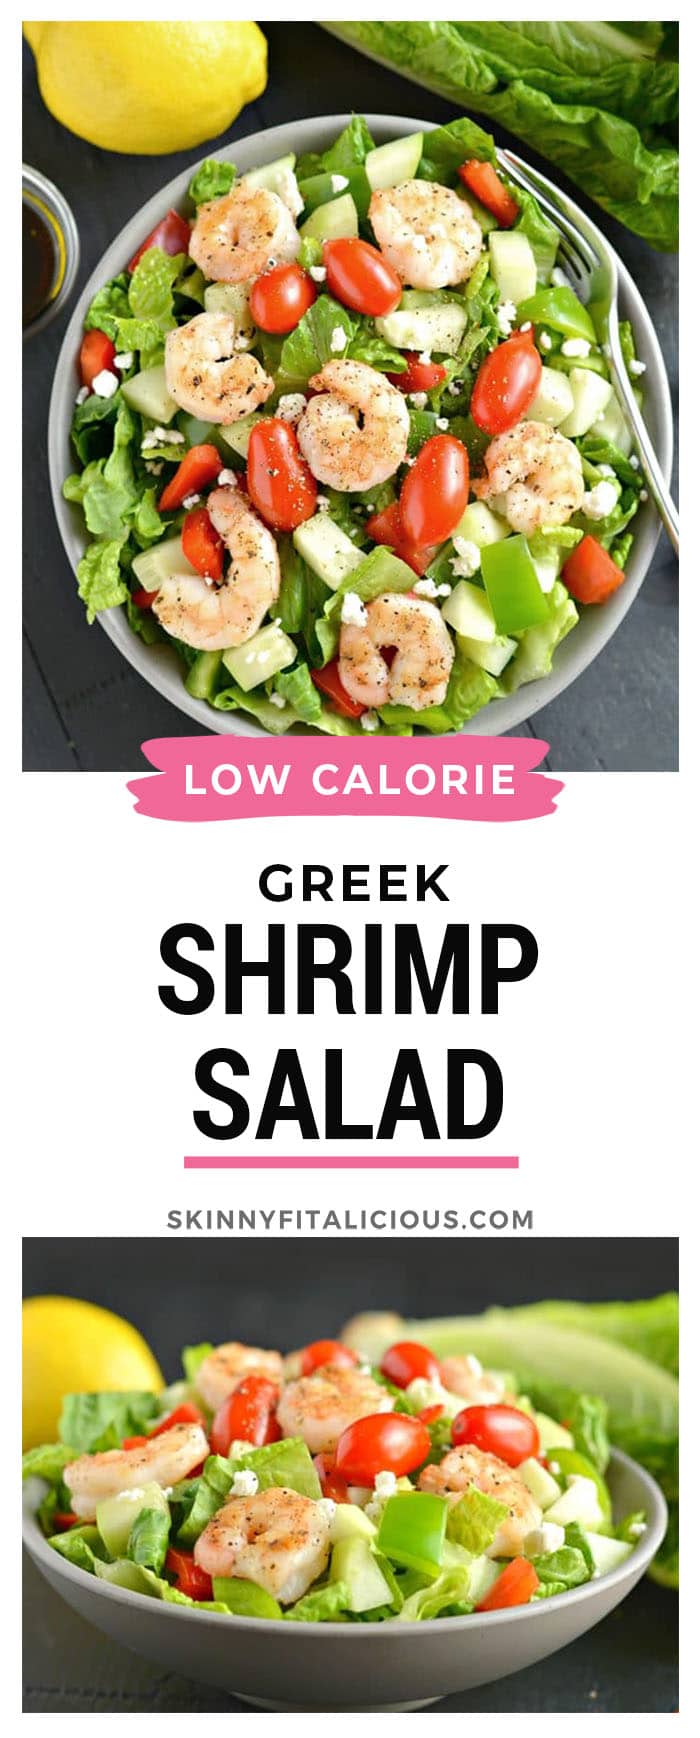 This Greek Shrimp Salad is a light, refreshing and EASY meal. Loaded with a secret blend of spices, freshly chopped vegetables and grilled shrimp, this healthy meal is equally delicious and filling! Gluten Free + Low Calorie